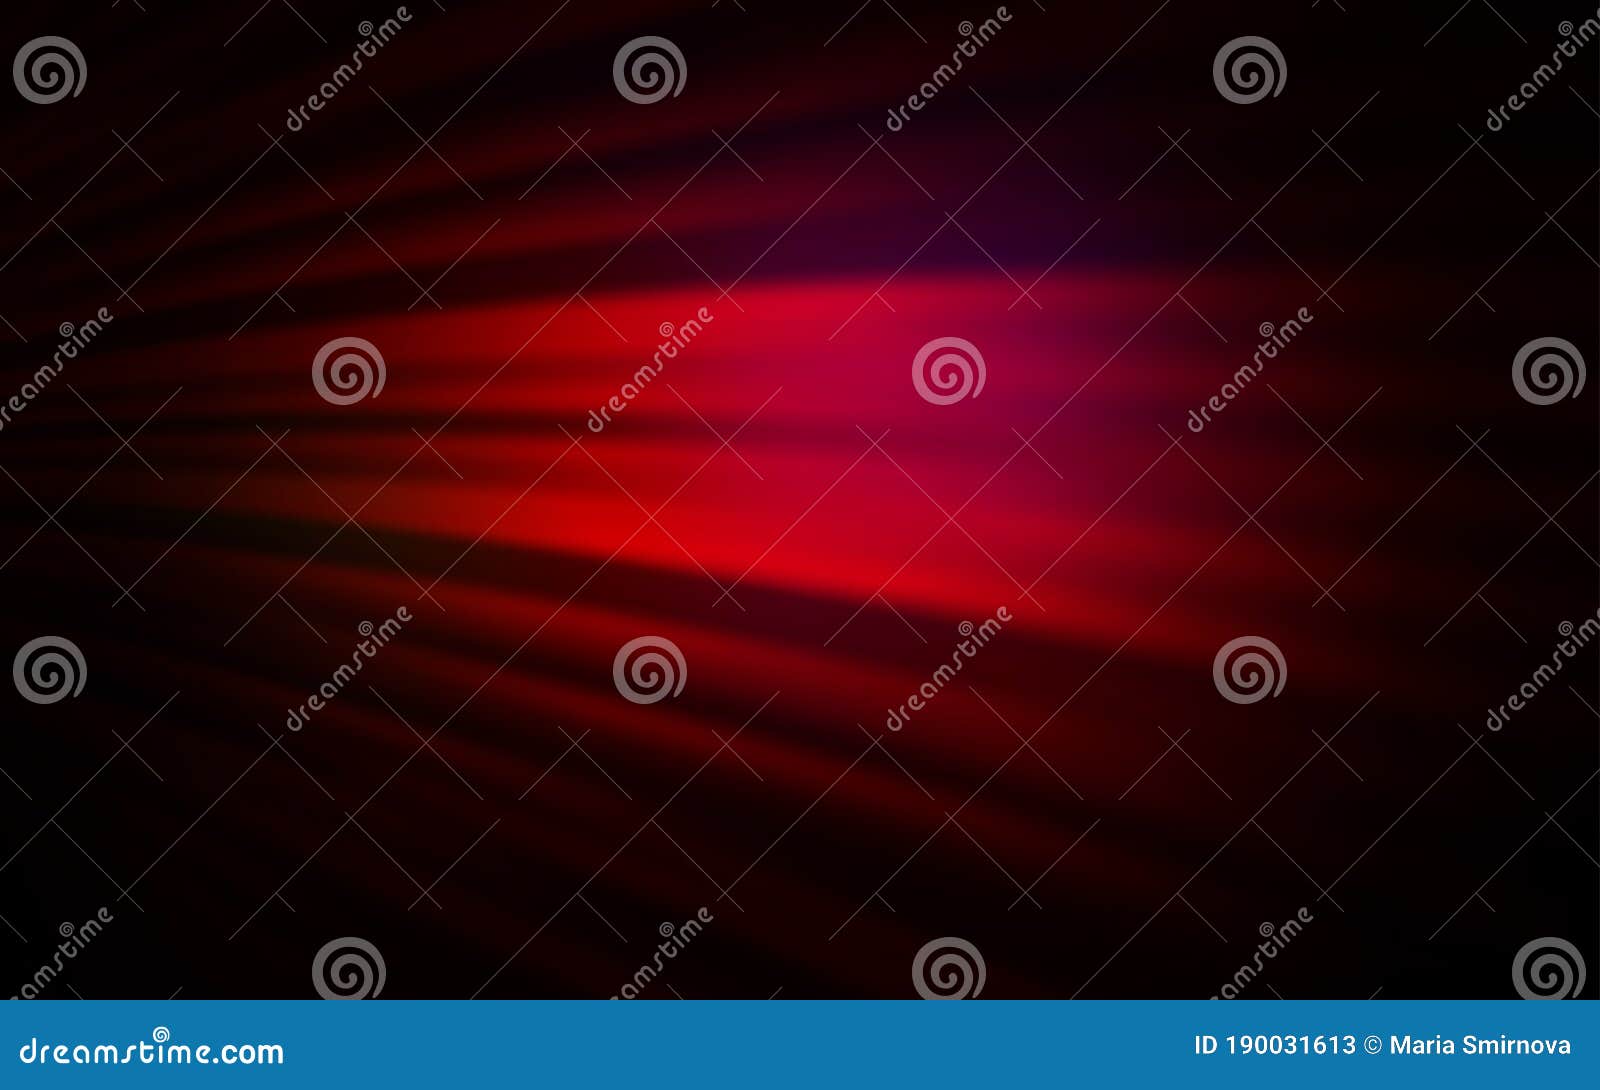 Dark Red Vector Layout with Bent Lines. Stock Vector - Illustration of ...